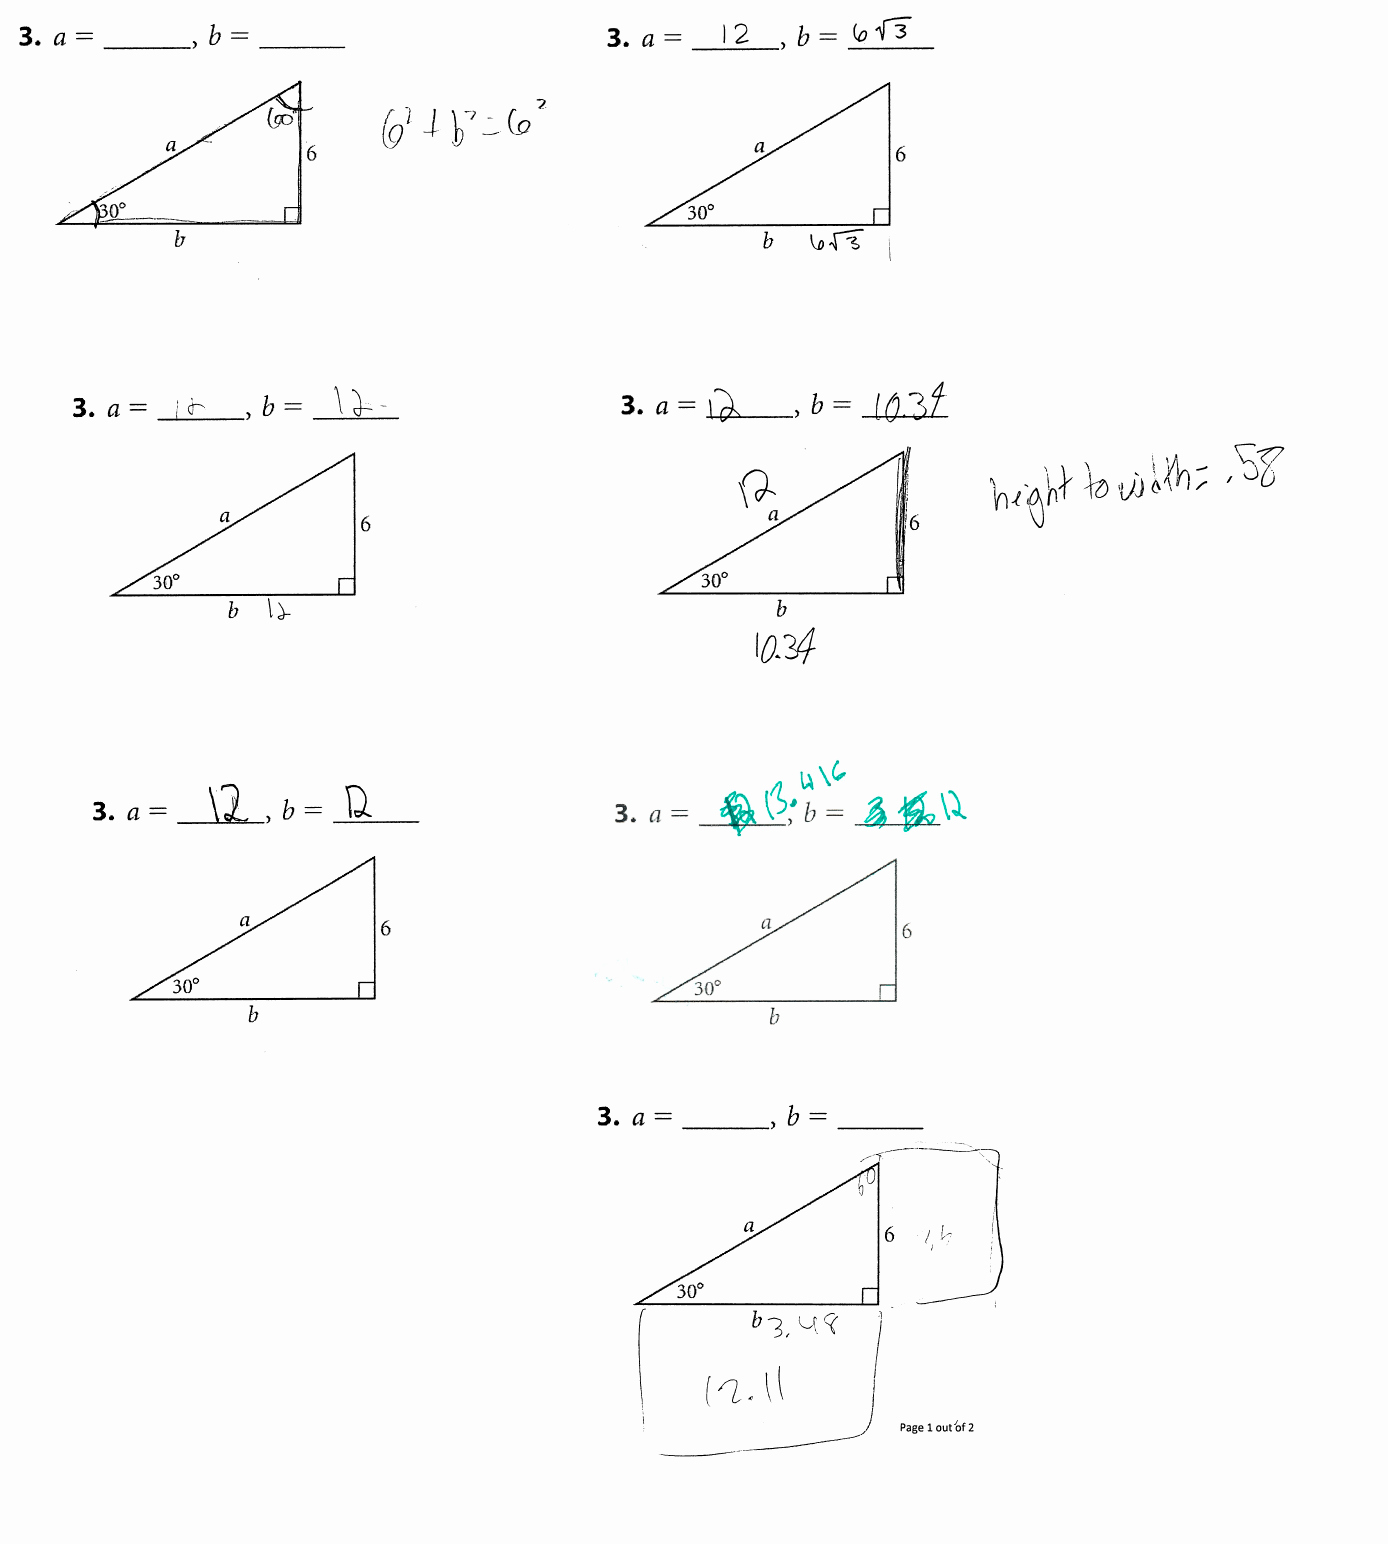 Right Triangle Trigonometry Worksheet Answers Elegant Trigonometry Ratios In Right Triangles Worksheet the Best